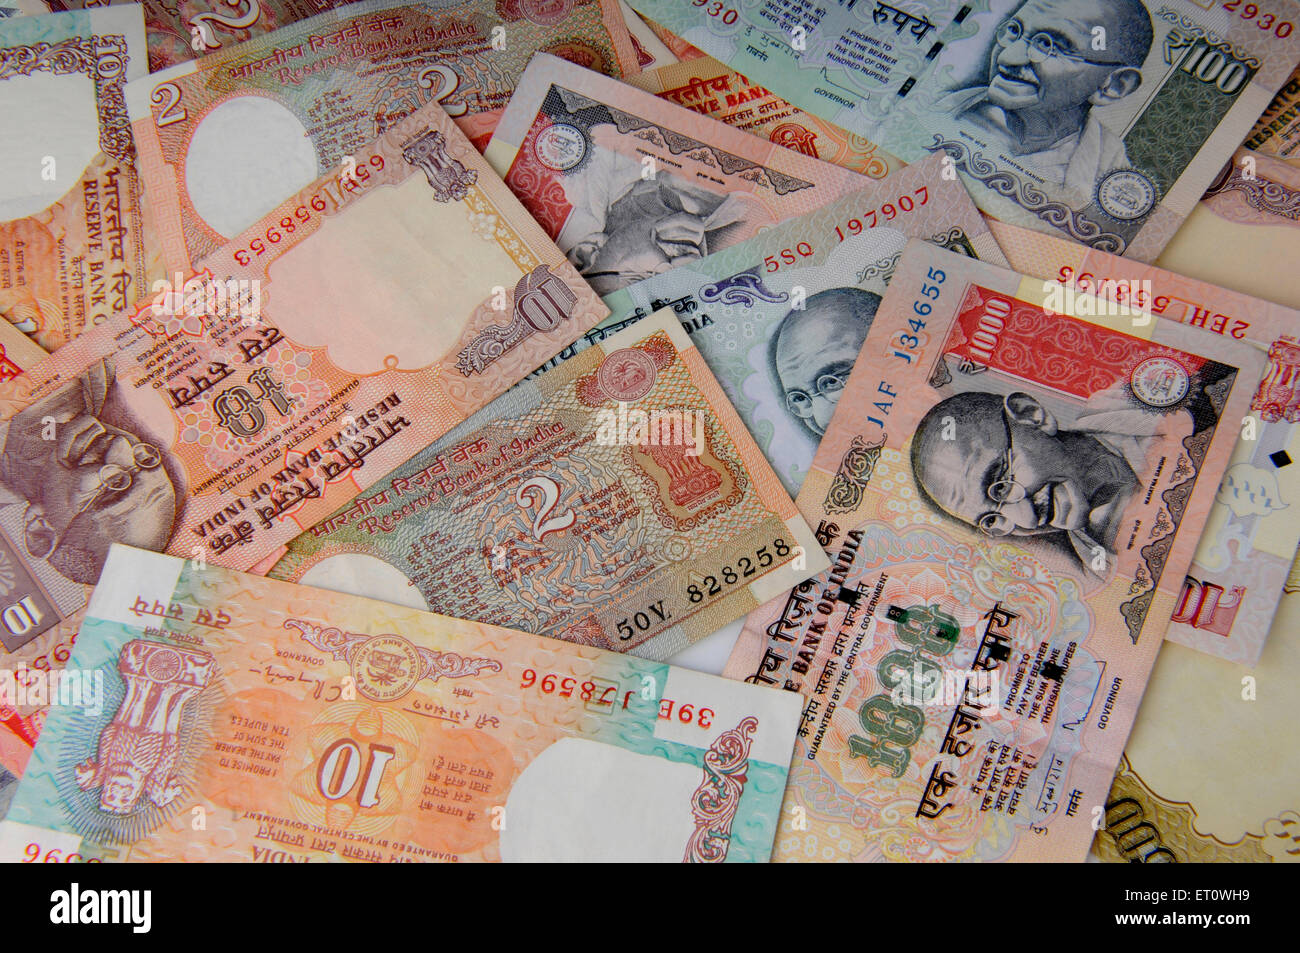 concept of Indian currency notes Stock Photo